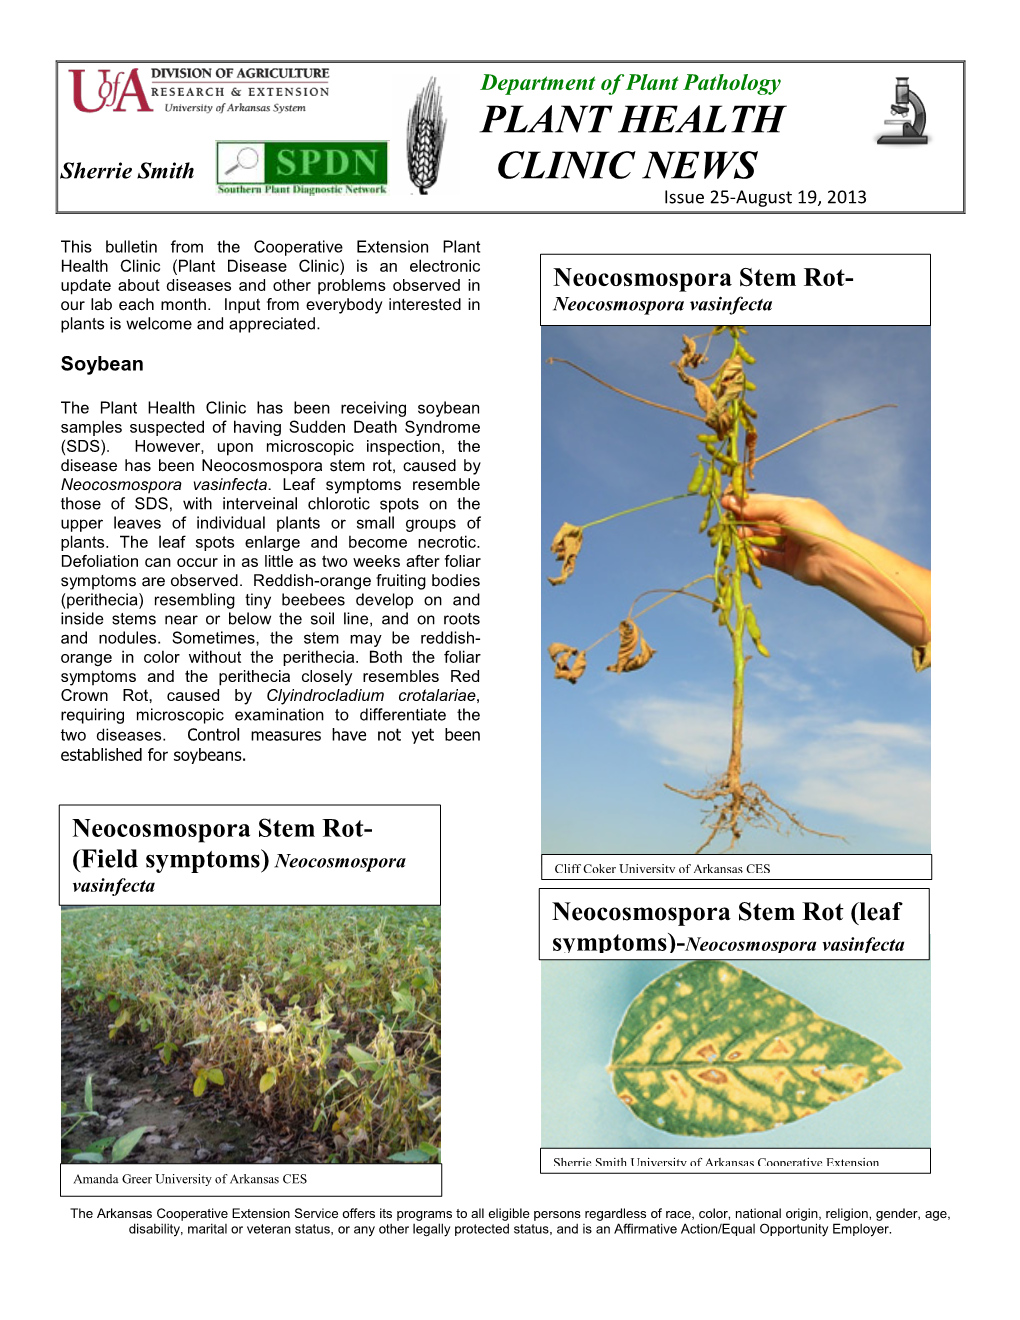 Plant Health Clinic News, Issue 25, 2013